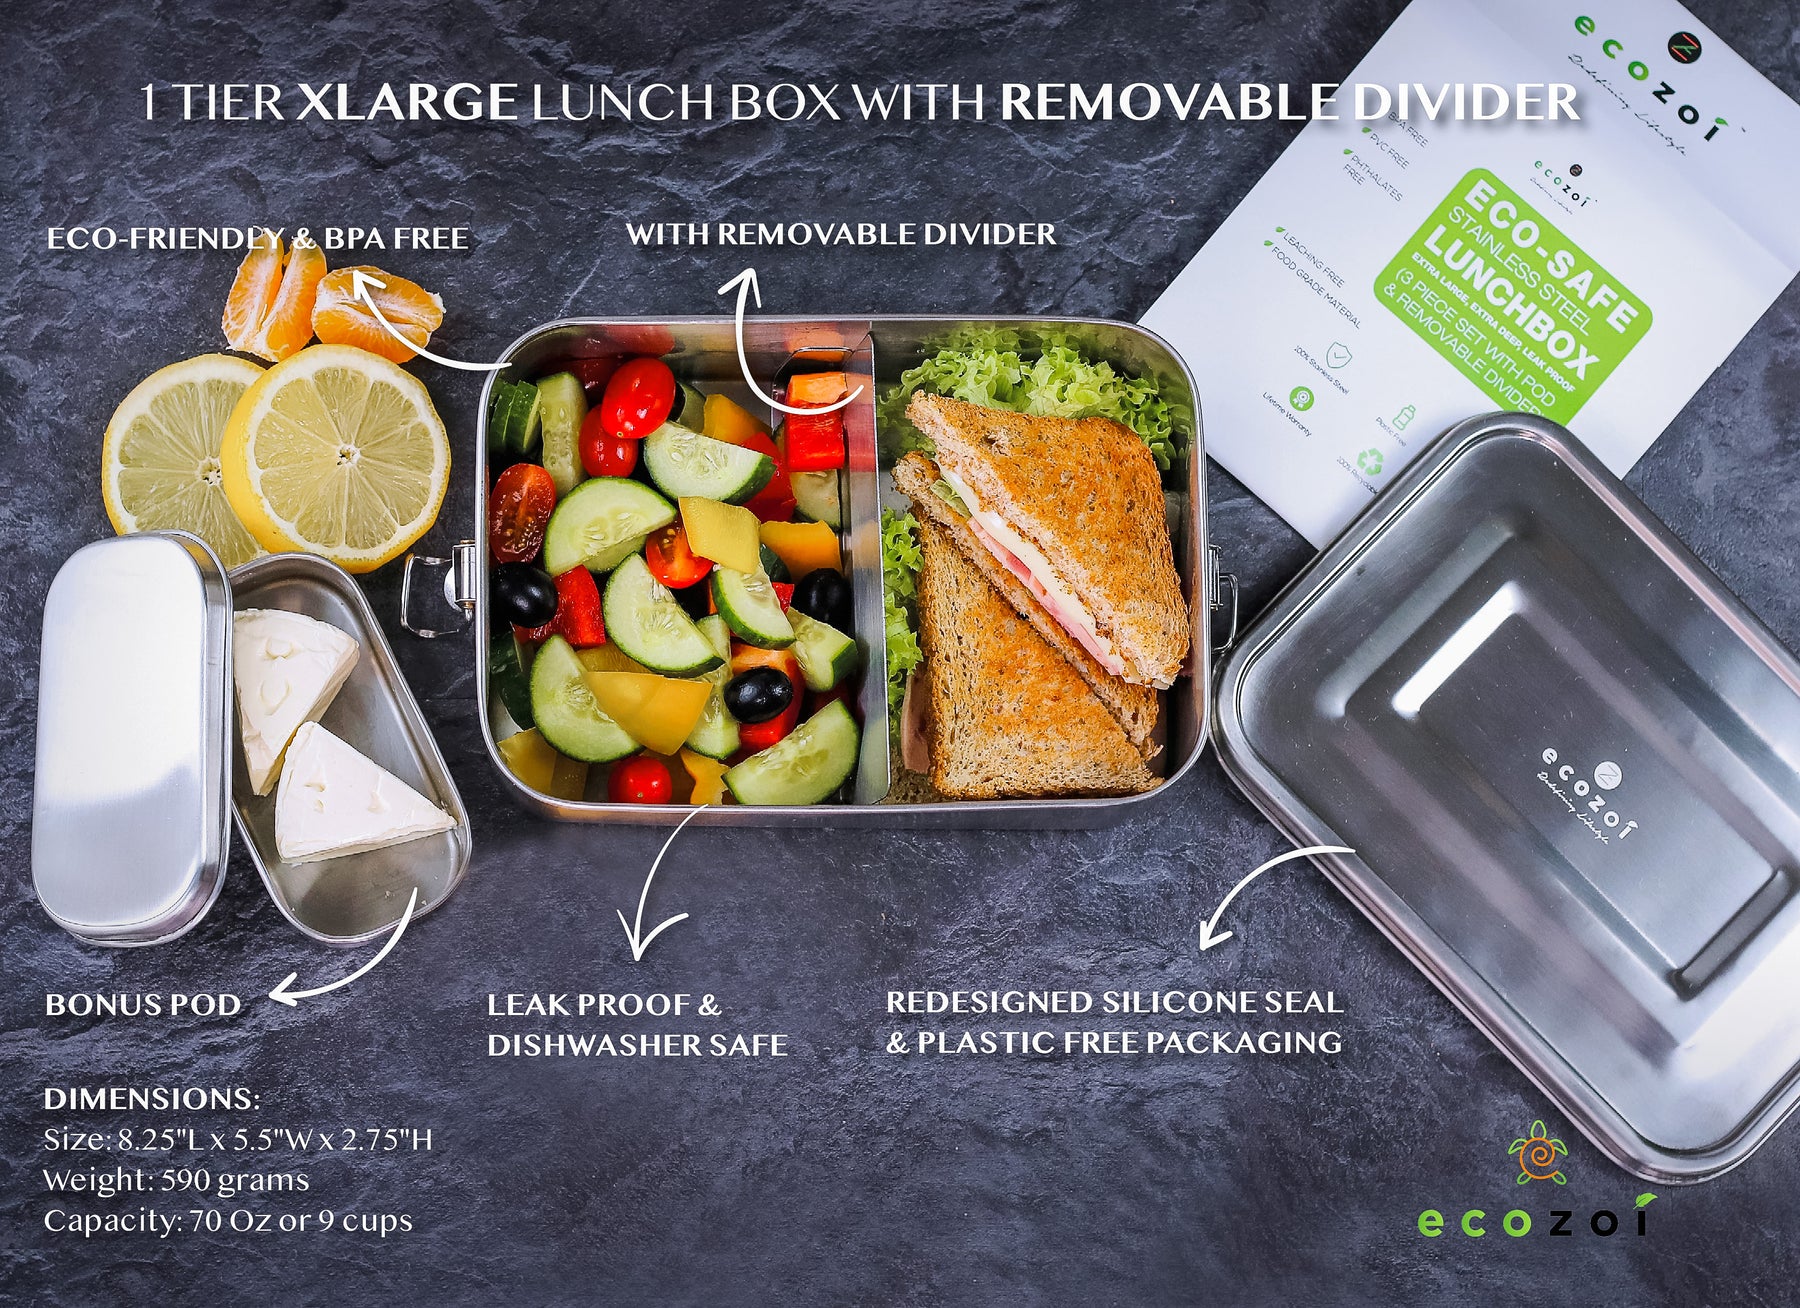 Stainless Steel Lunch Box, 3 Compartment Snap-On, 50 oz by ecozoi